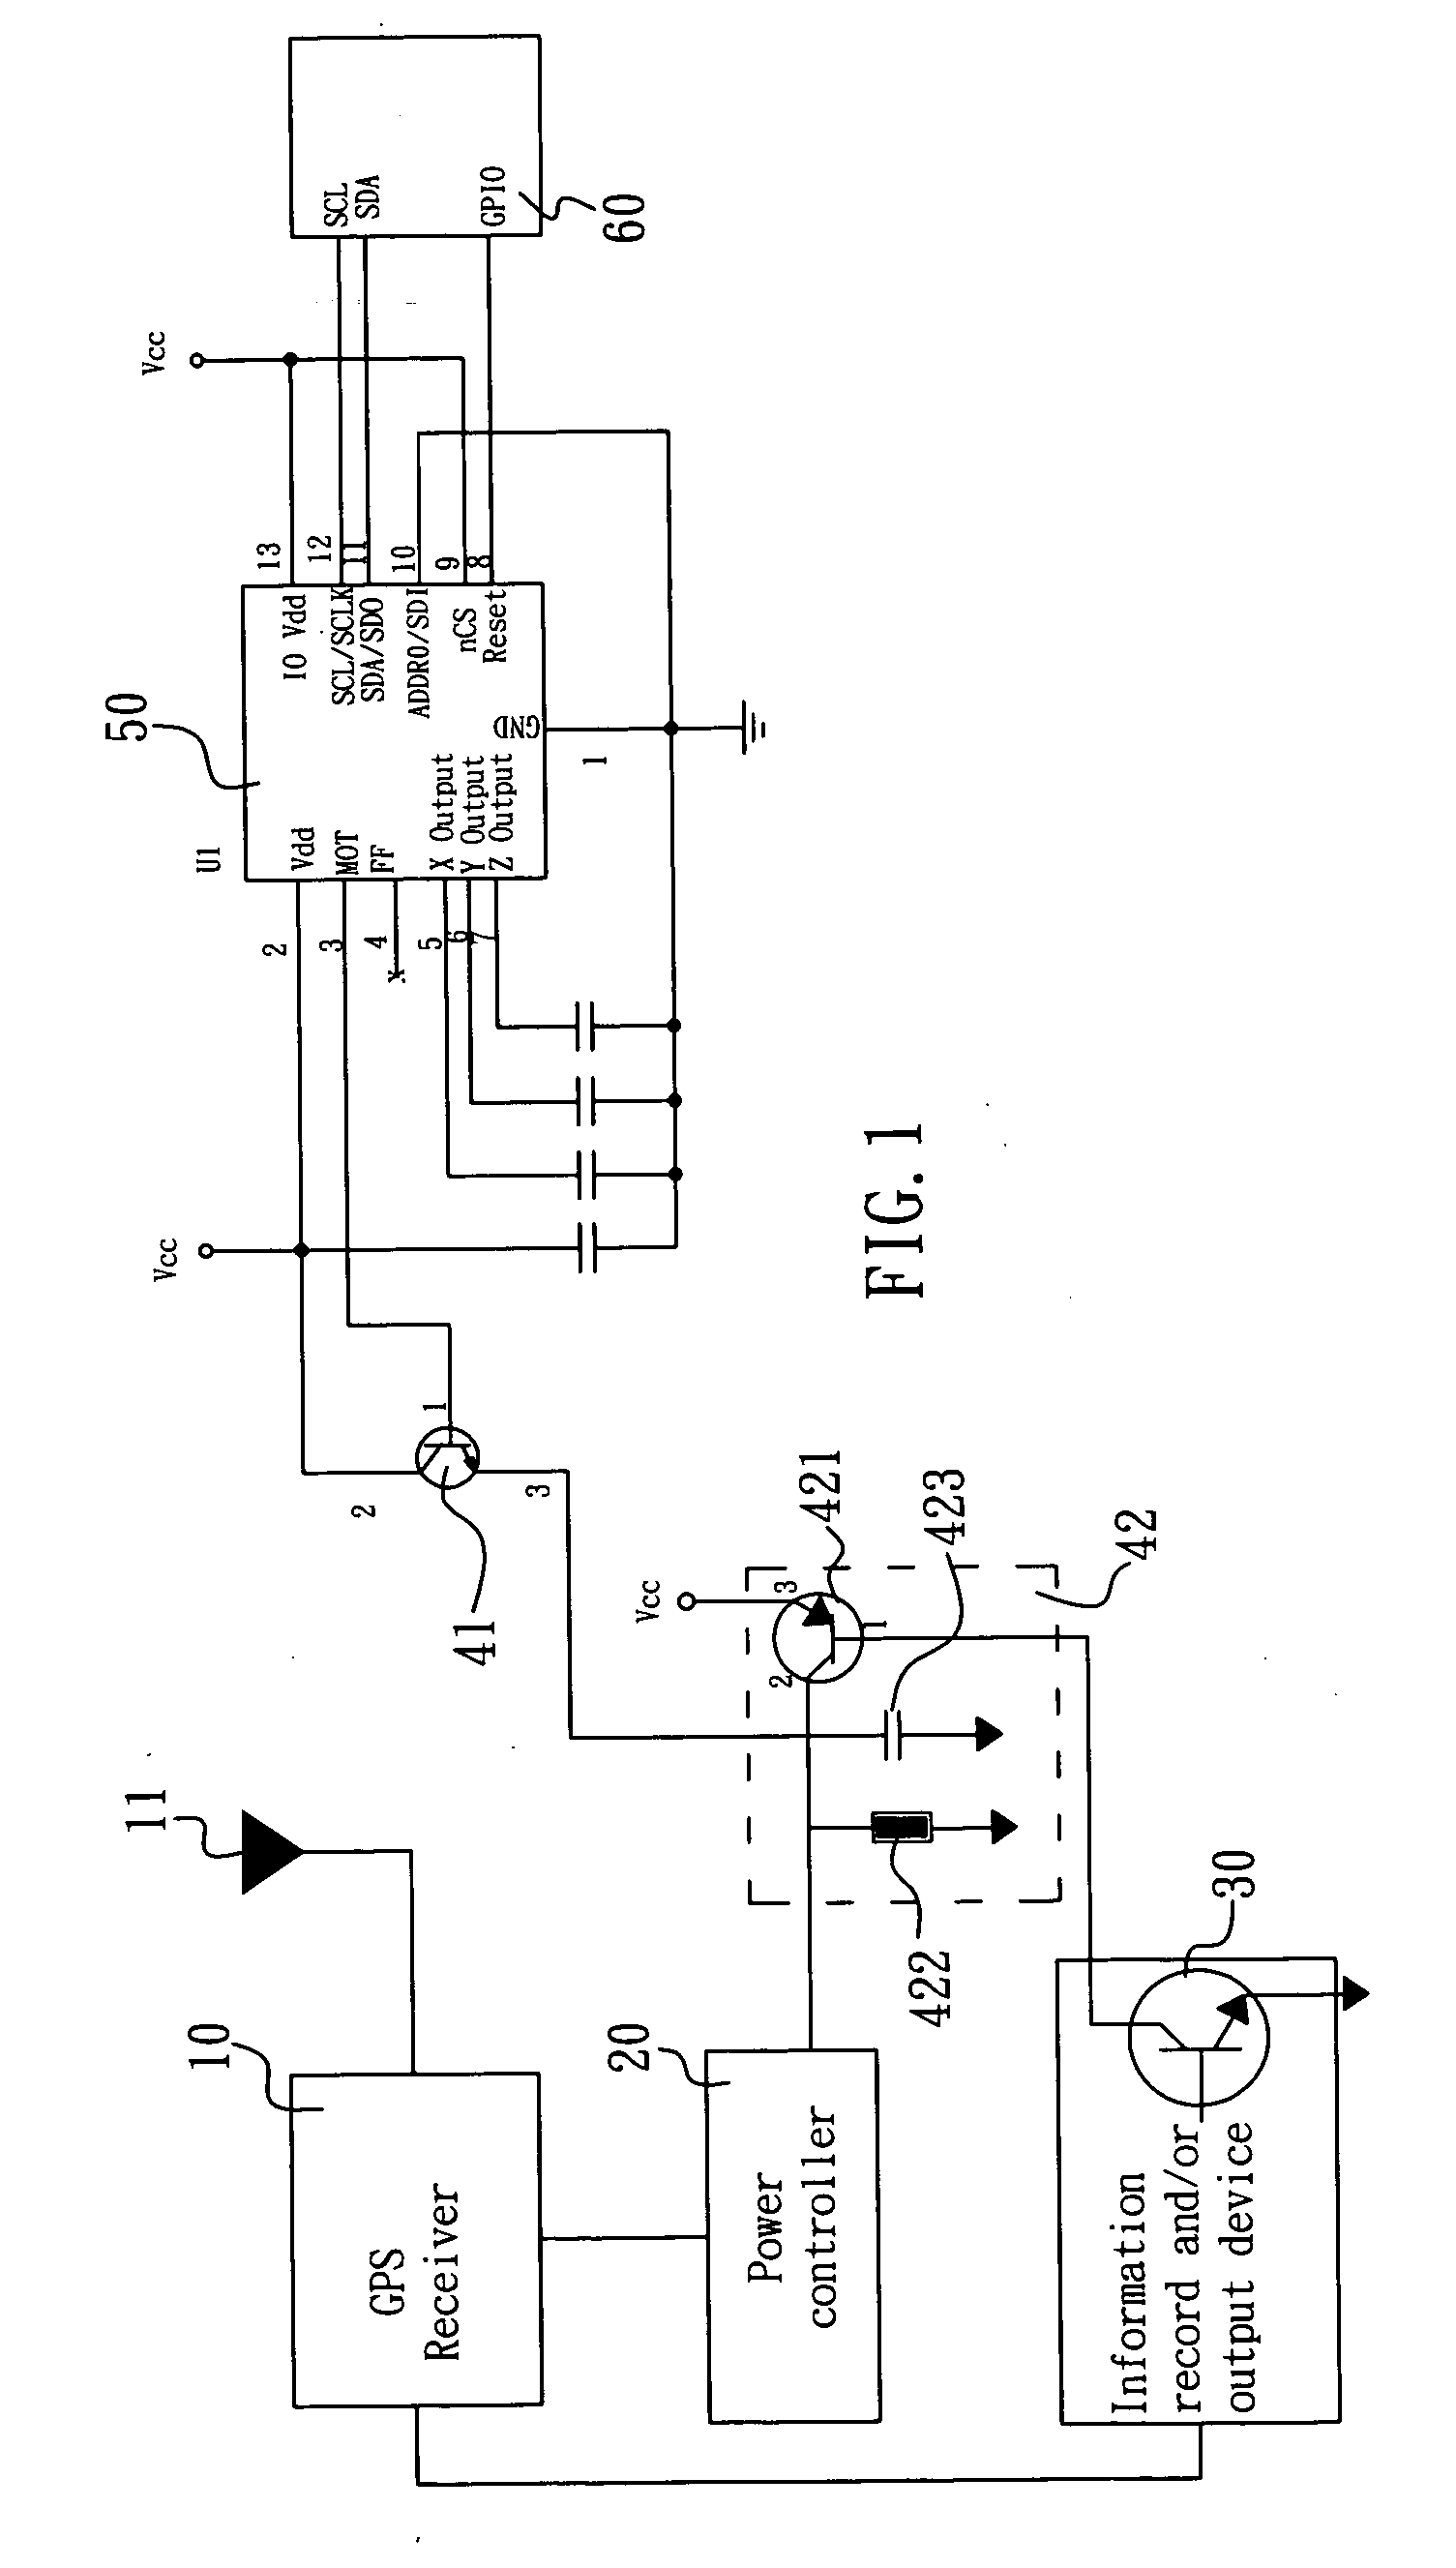 Power saving device for GPS device